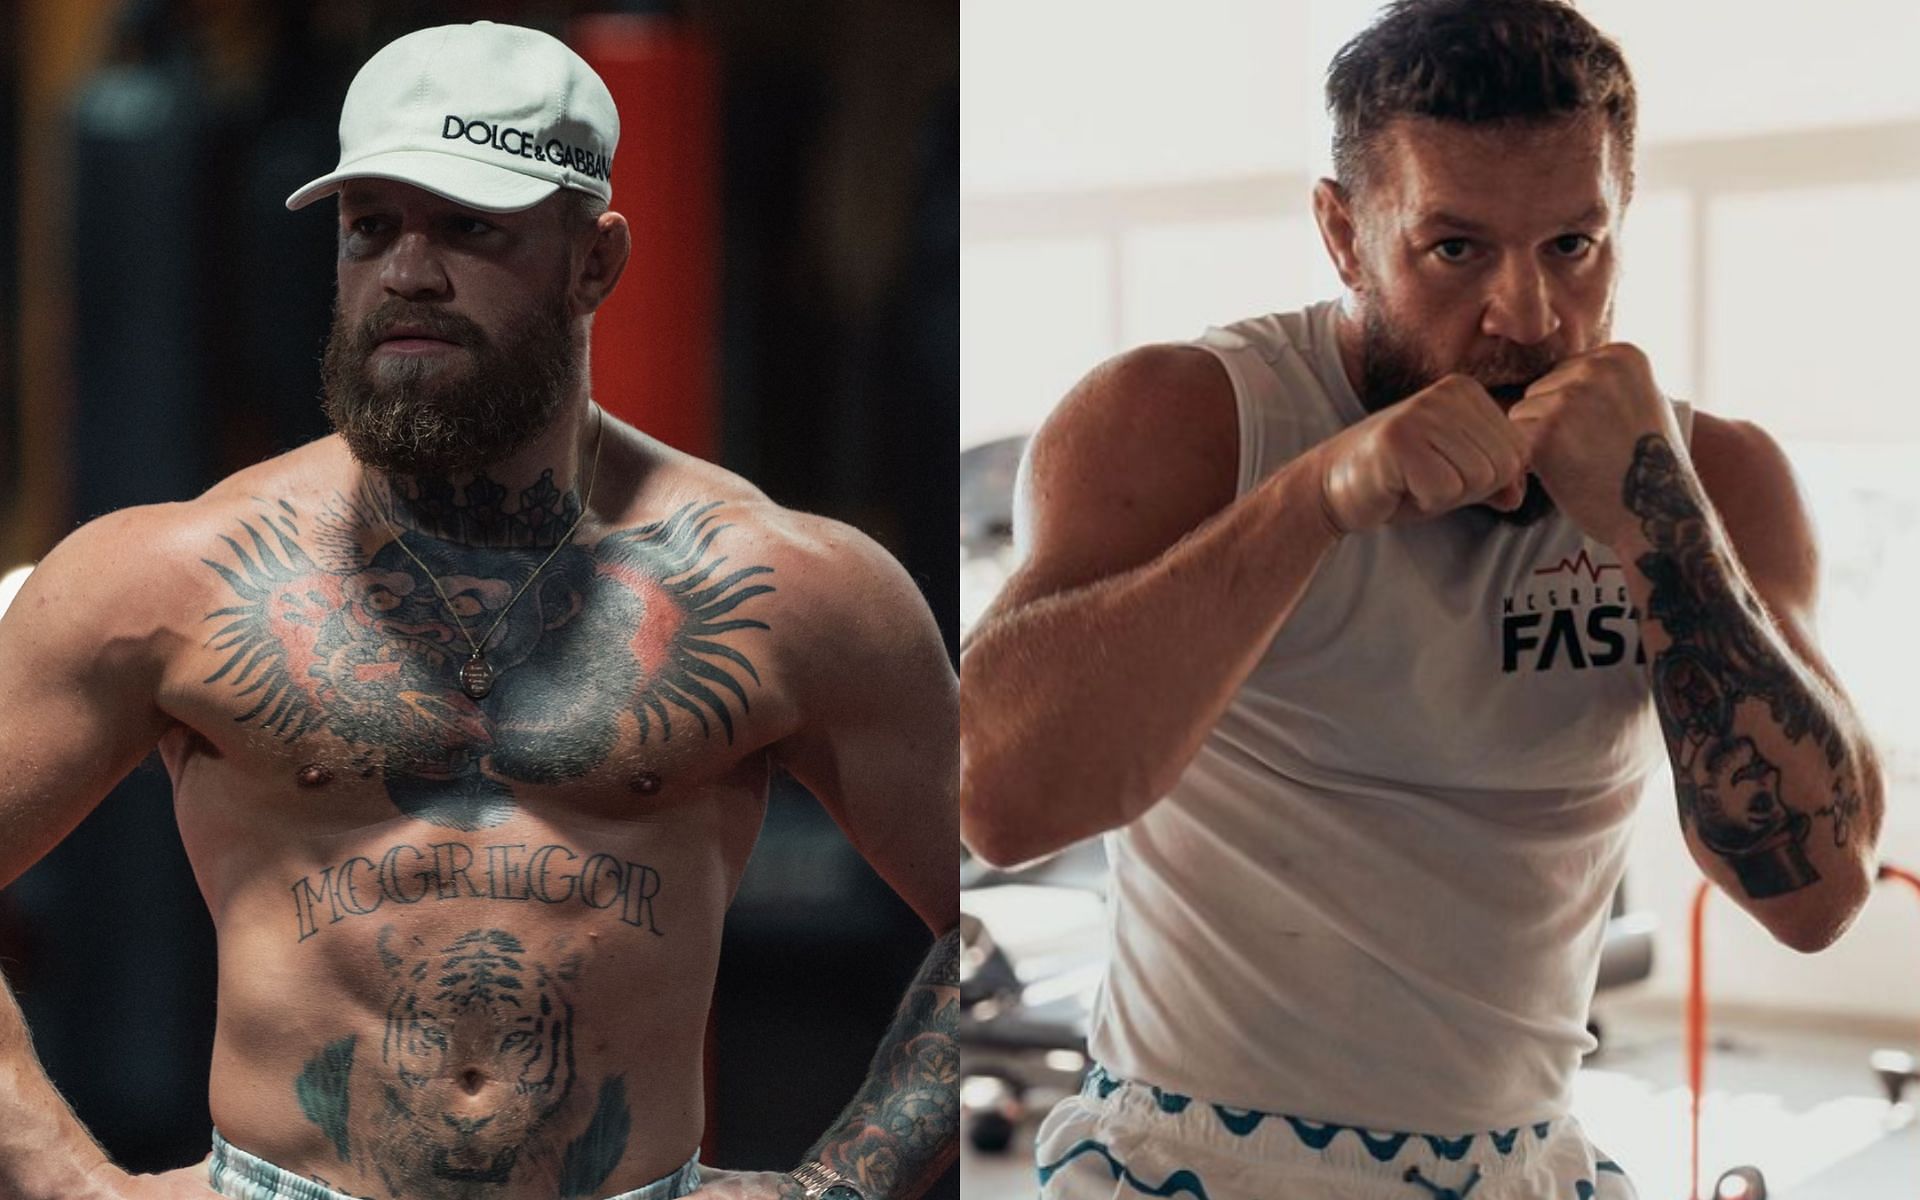 Conor McGregor [Images courtesy of @TheNotoriousMMA on Instagram and Twitter]